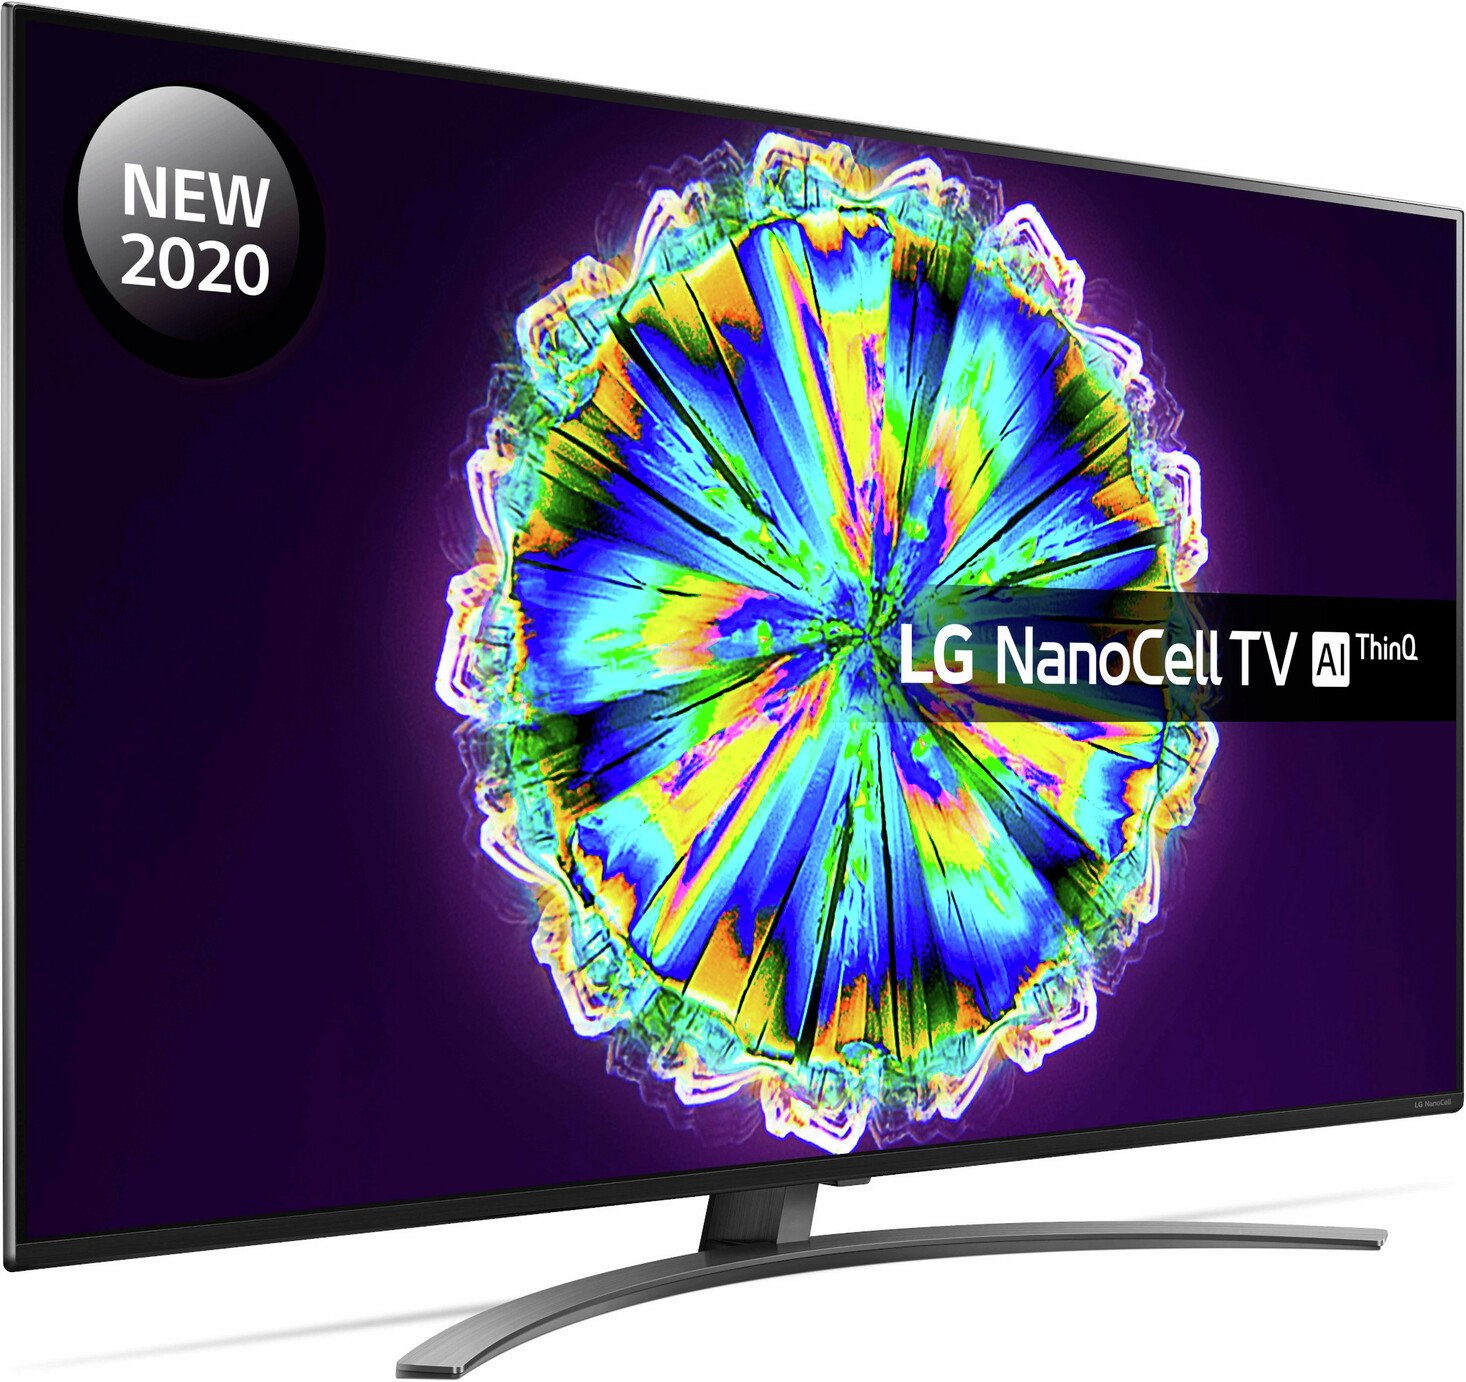 LG 49 Inch 49NANO86 Smart 4K Ultra HD LED TV with HDR Review